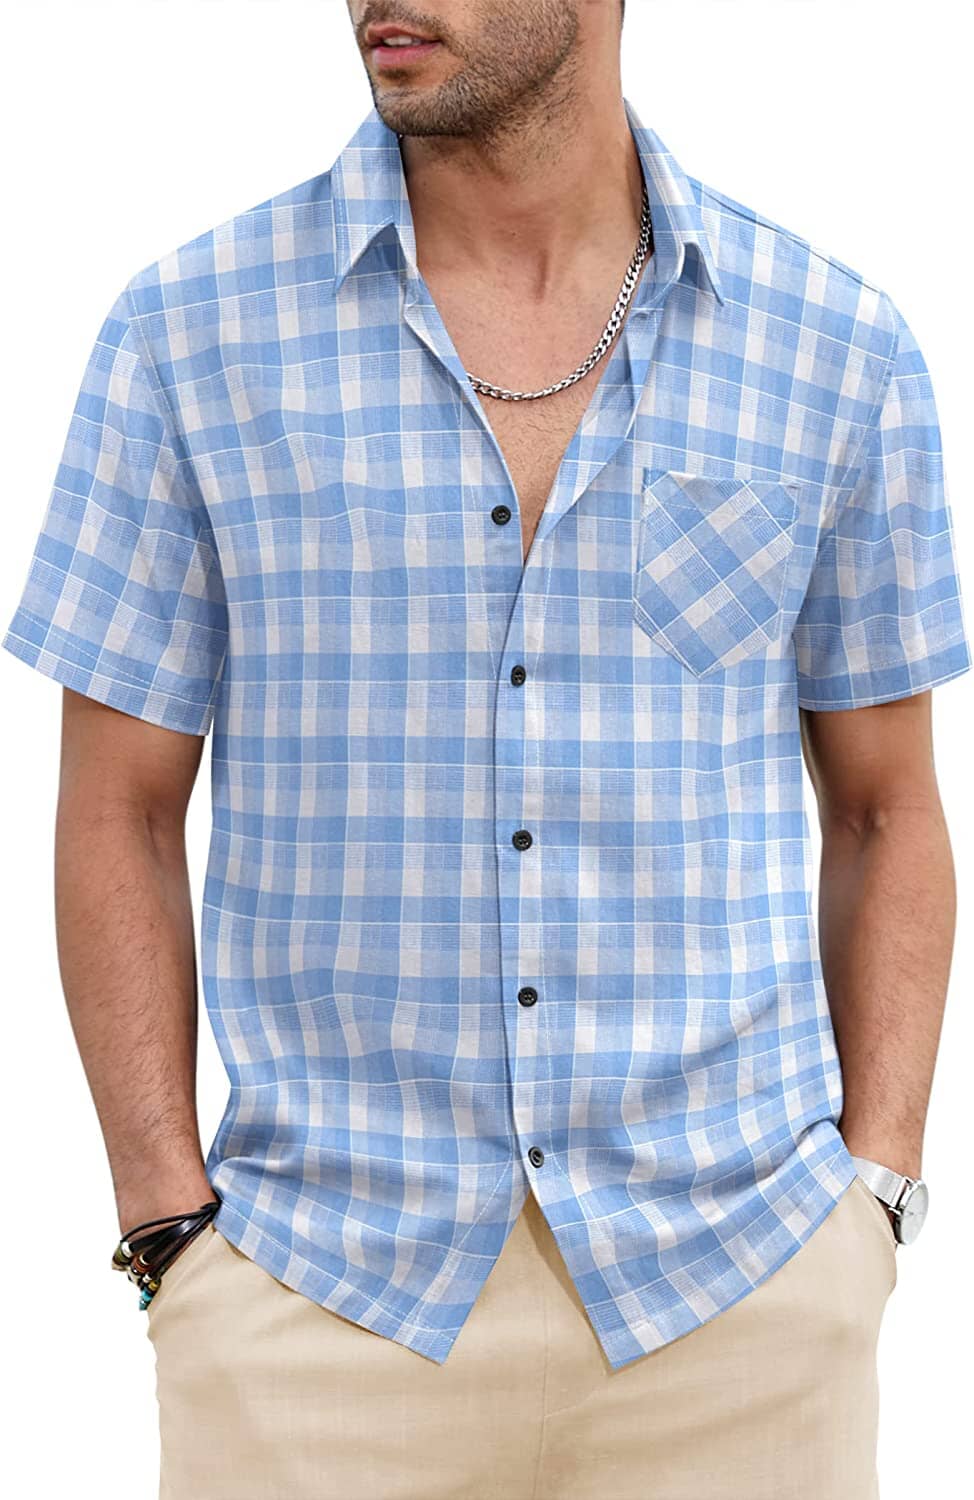 Classic Short Sleeve Plaid Cotton Shirts with Pocket (US Only) Shirts COOFANDY Store Light Blue S 